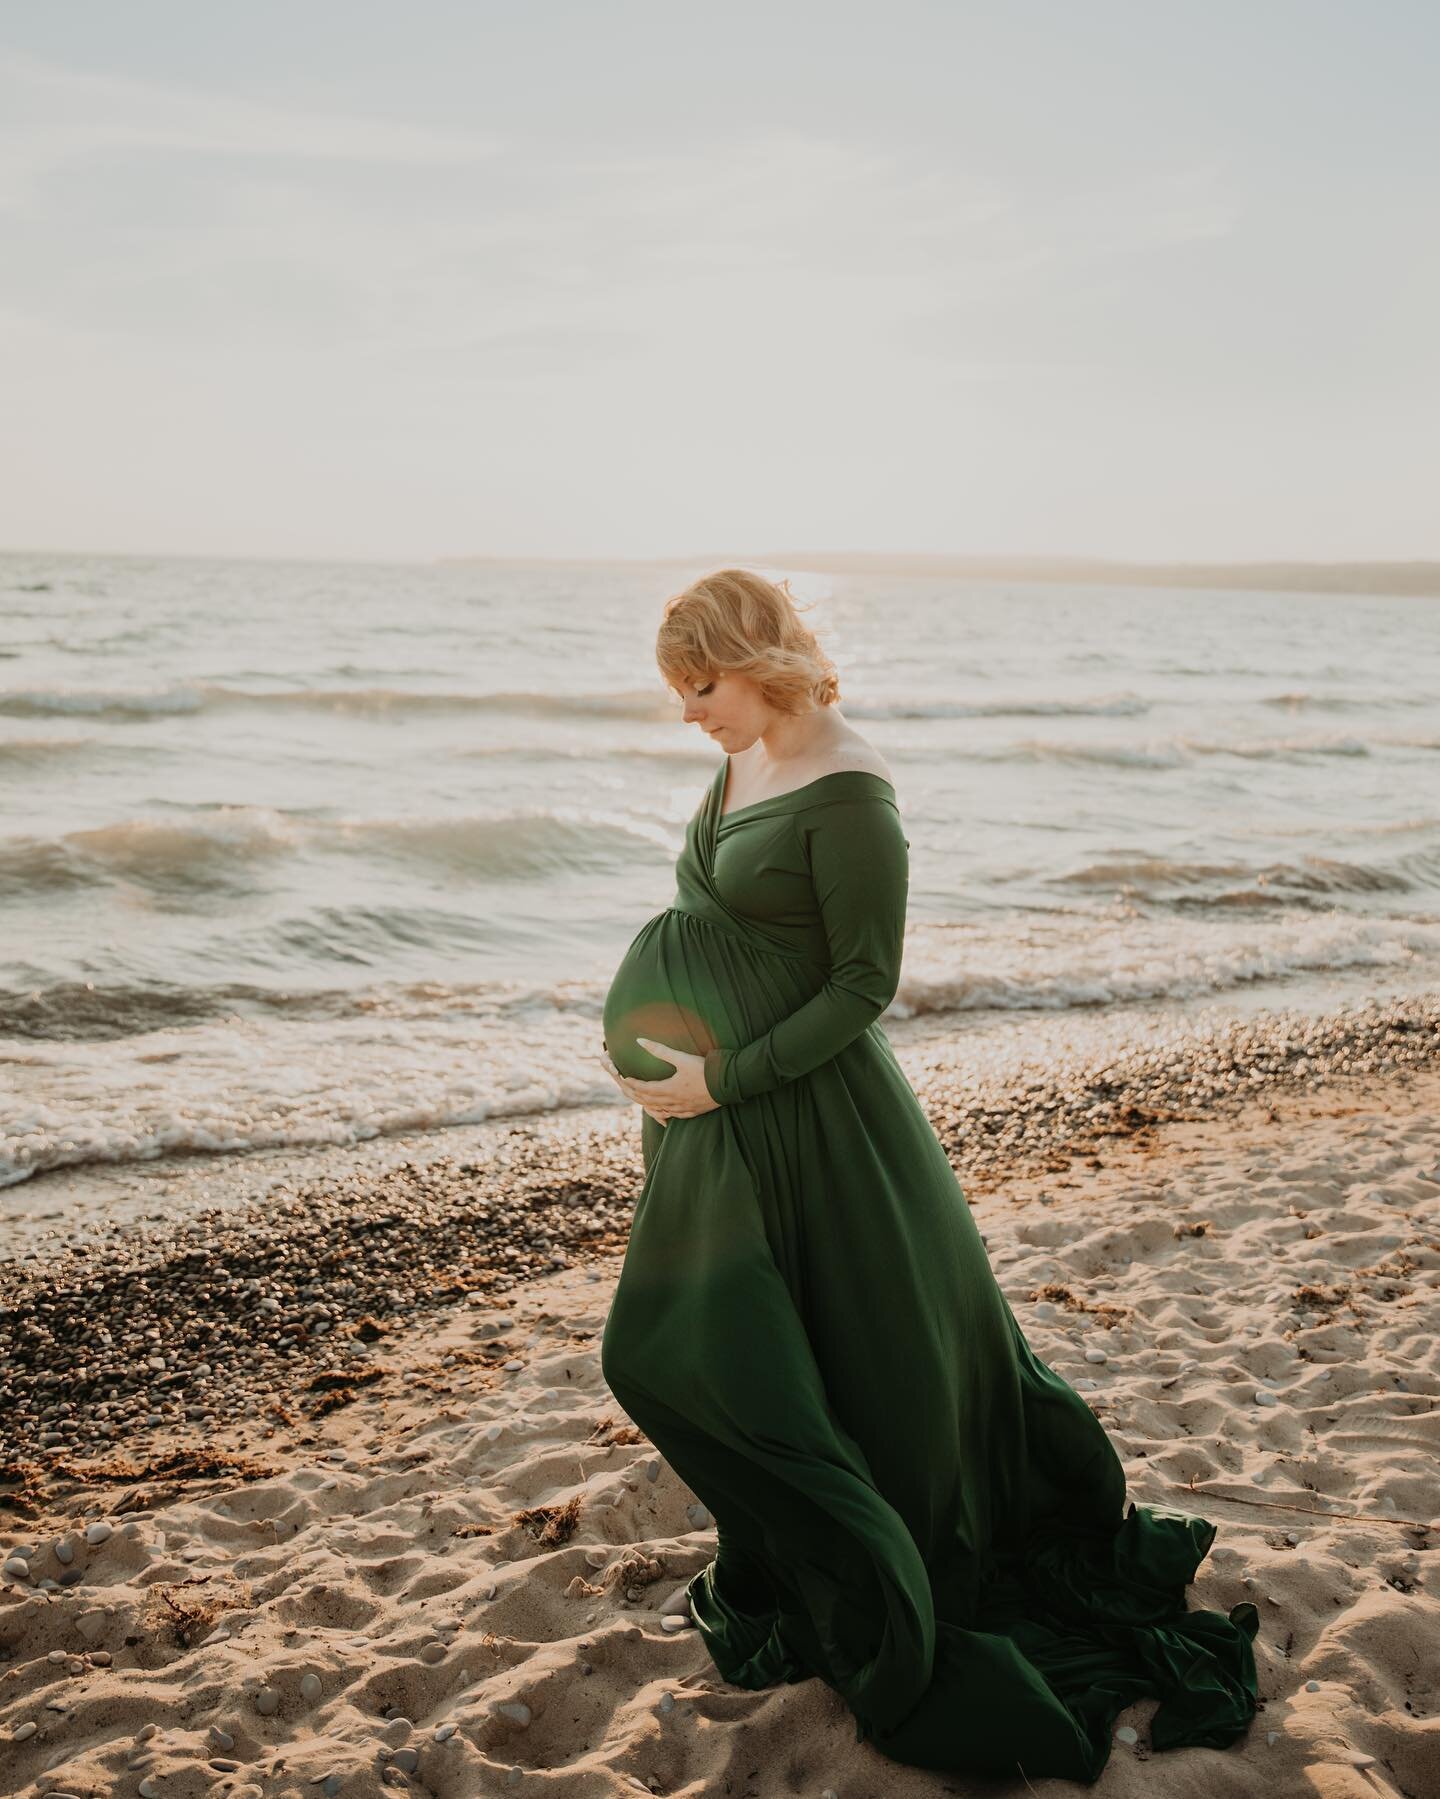 That Lake Michigan glow is no joke ✨

I have SO many favorites from this session and these are just from the tail end of it!

#michiganphotographer #maternityphotography #maternityshoot #maternityfashion #northernmichiganphotographer #familyphotograp